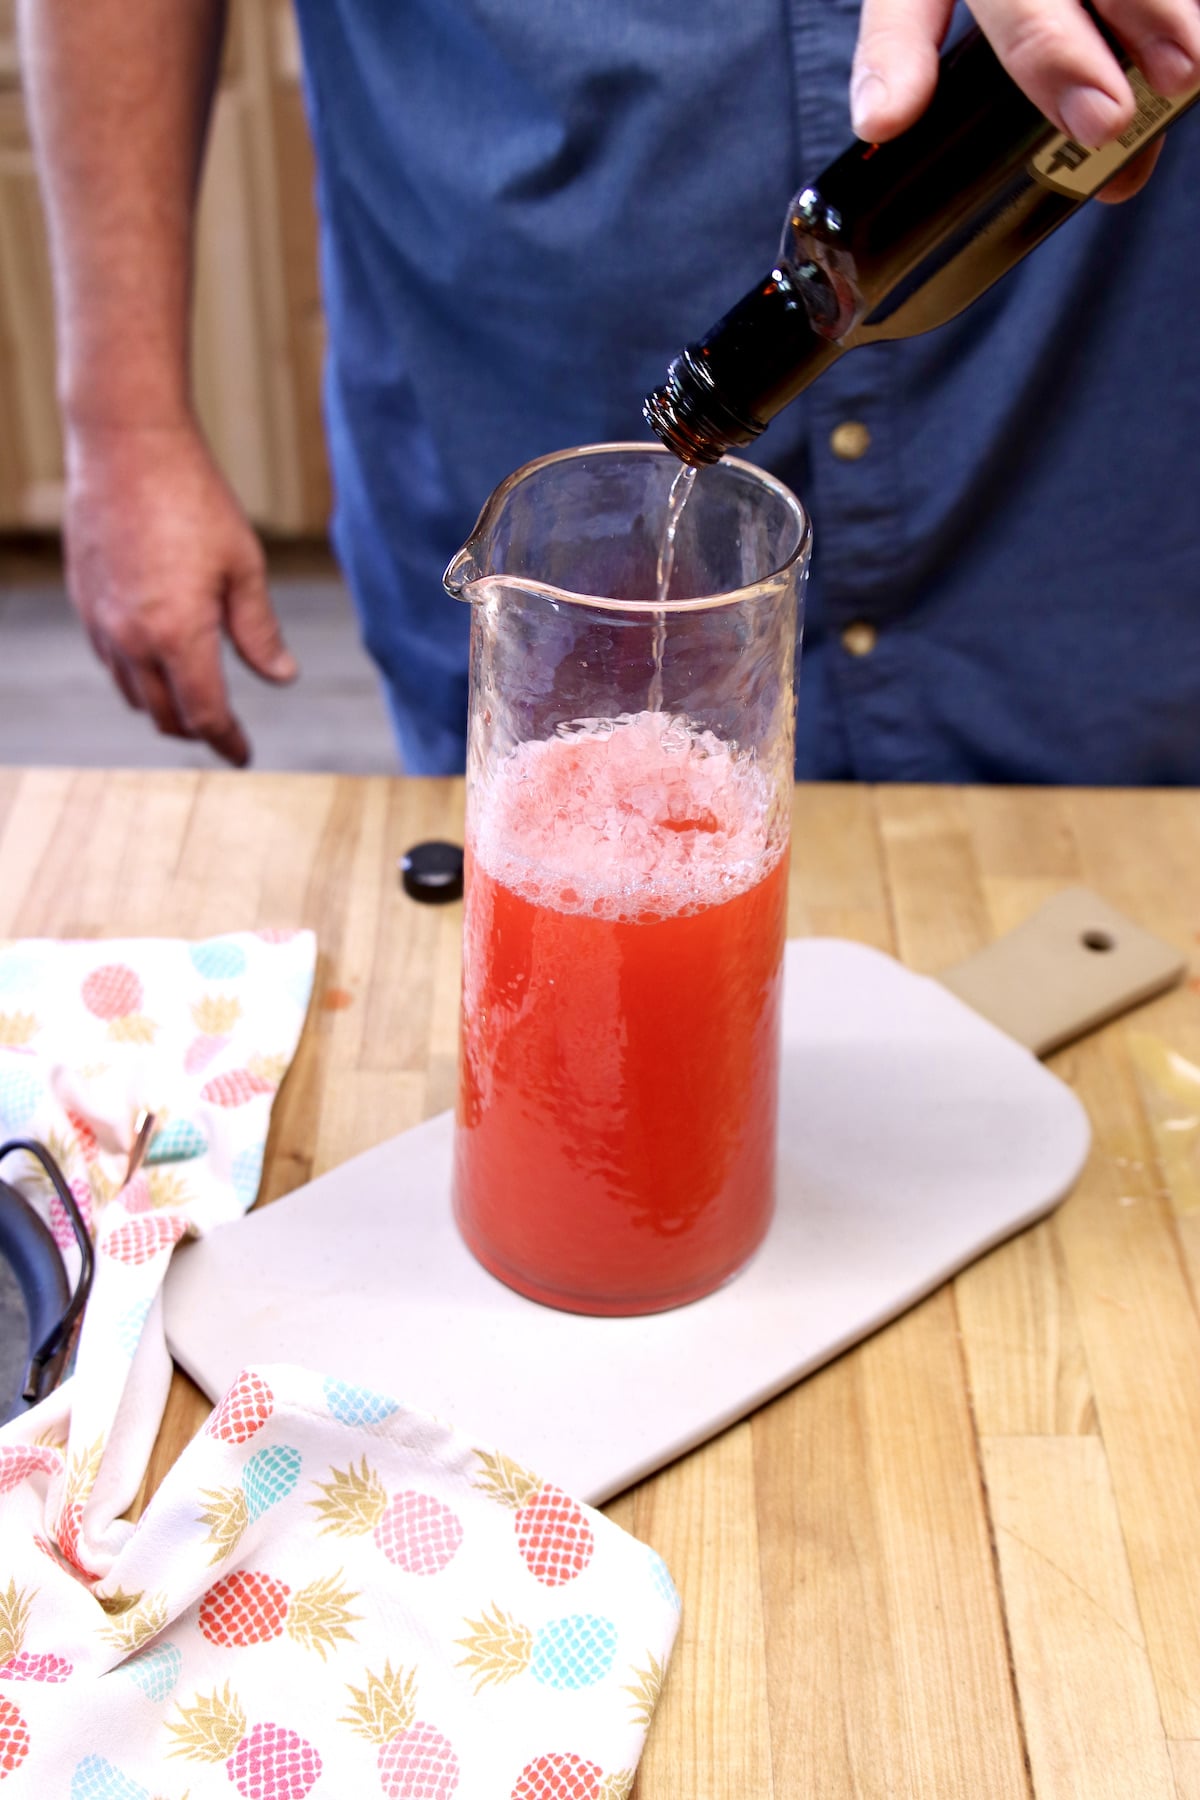 Adding triple sec to party punch.